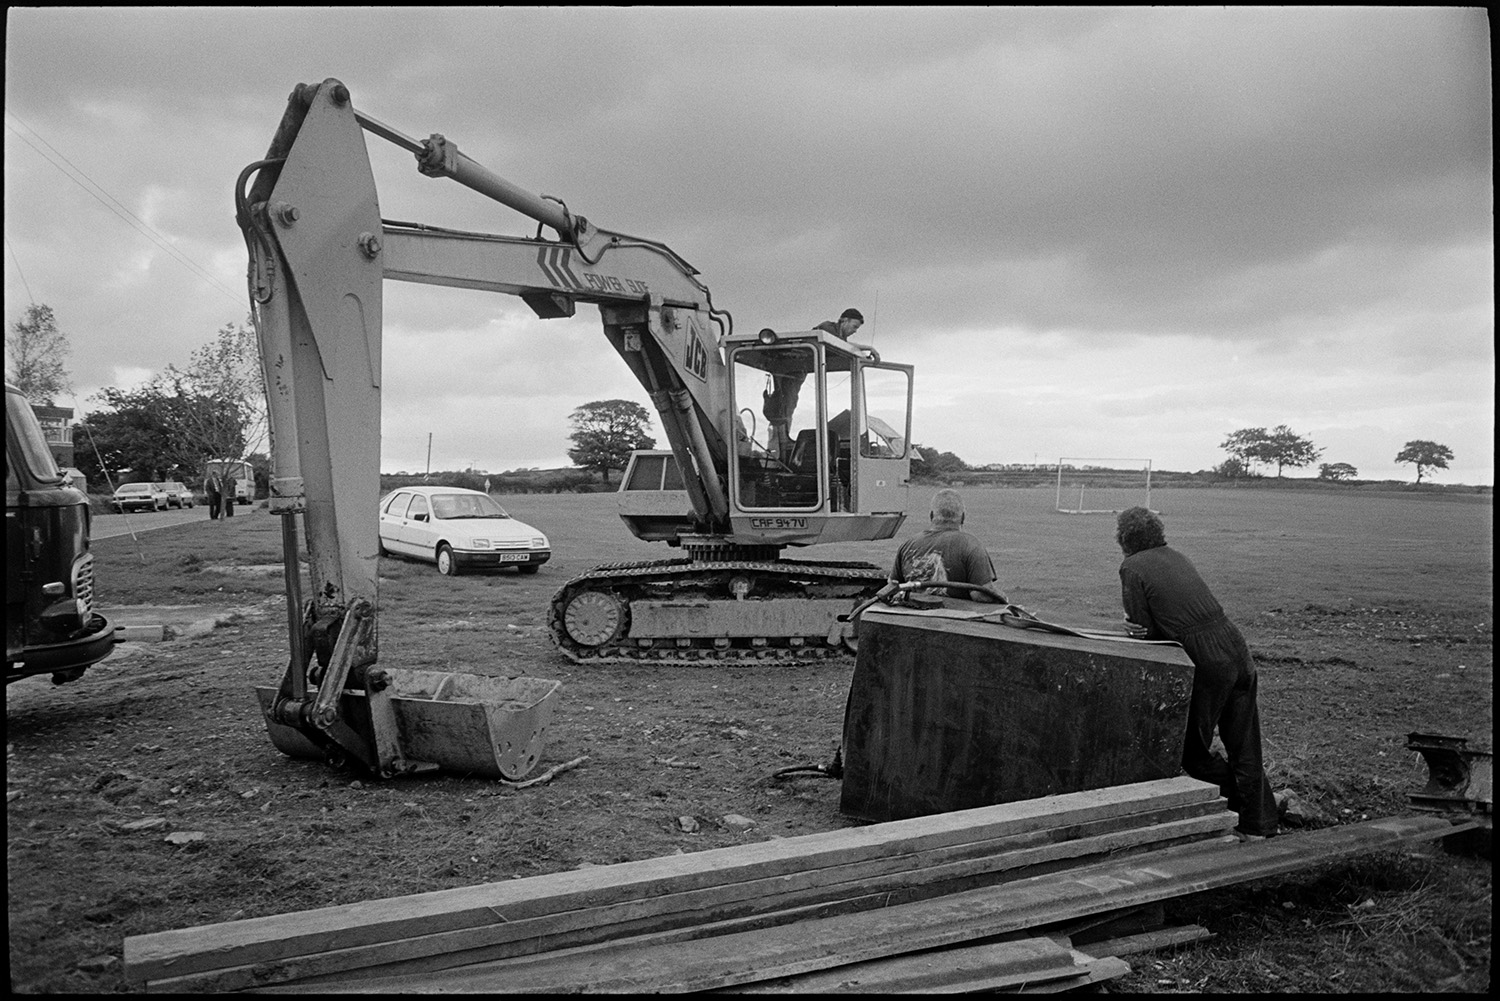 Excavator clearing ground for new school buildings, men drilling.
[Two men standing by a metal tank and planks of wood, near a JCB digger on the site of the new primary school at Chulmleigh. There is another man standing on the excavator. They are looking towards a sports field, cars and a bus in the background.]